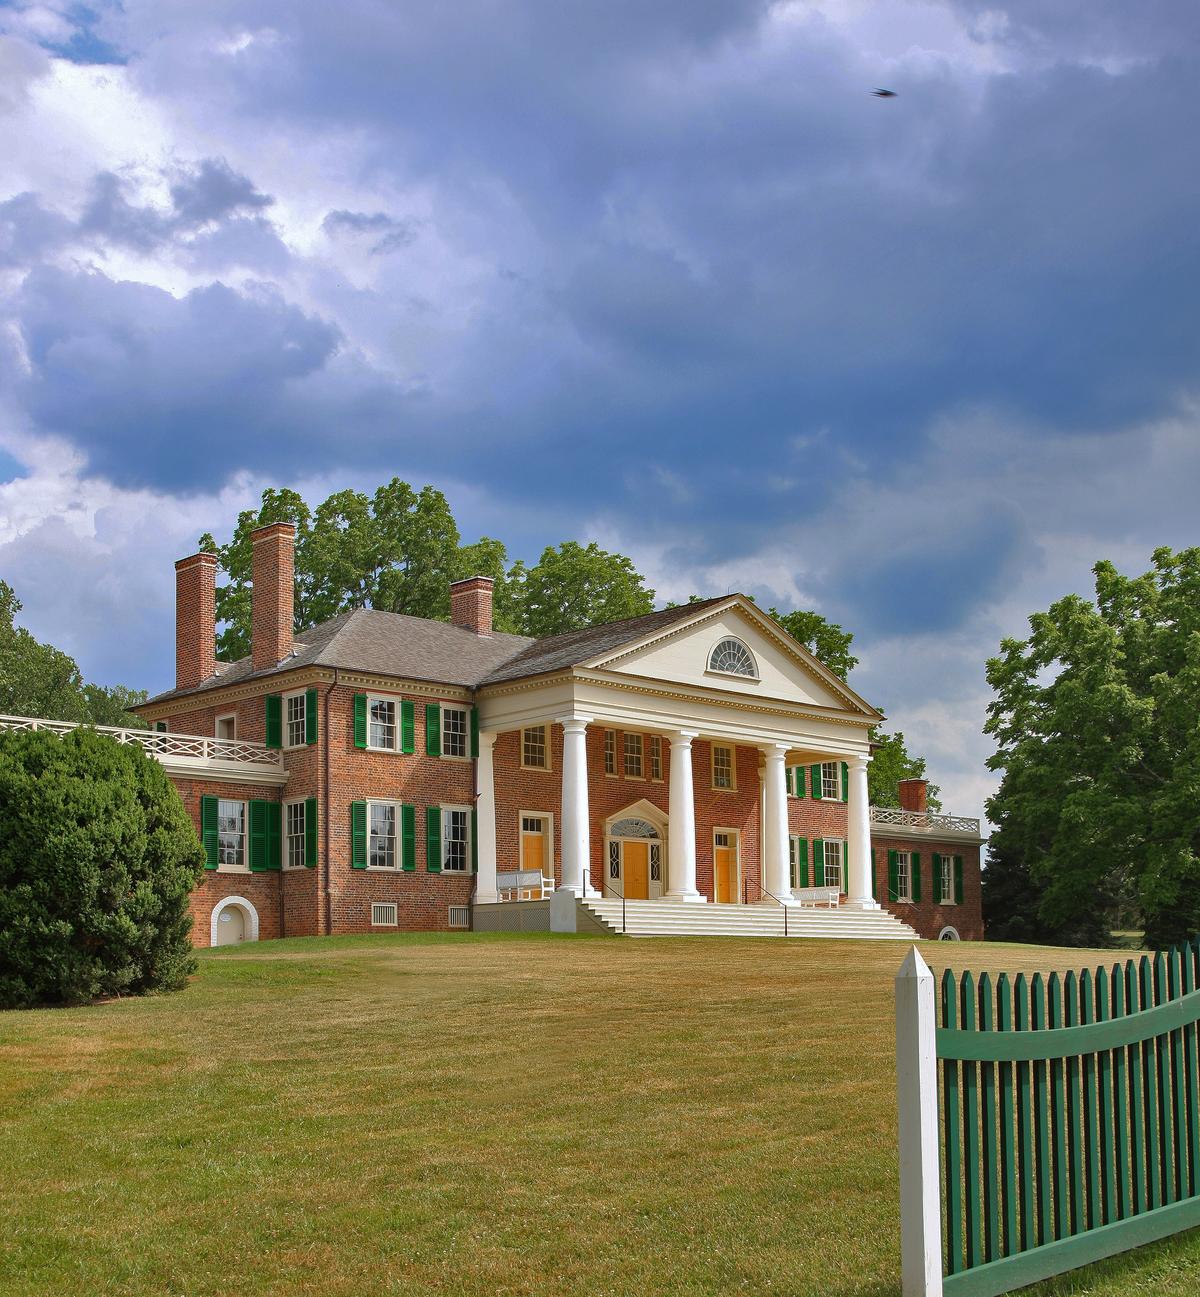 The main house at Montpelier. (Courtesy of Montpelier Foundation)